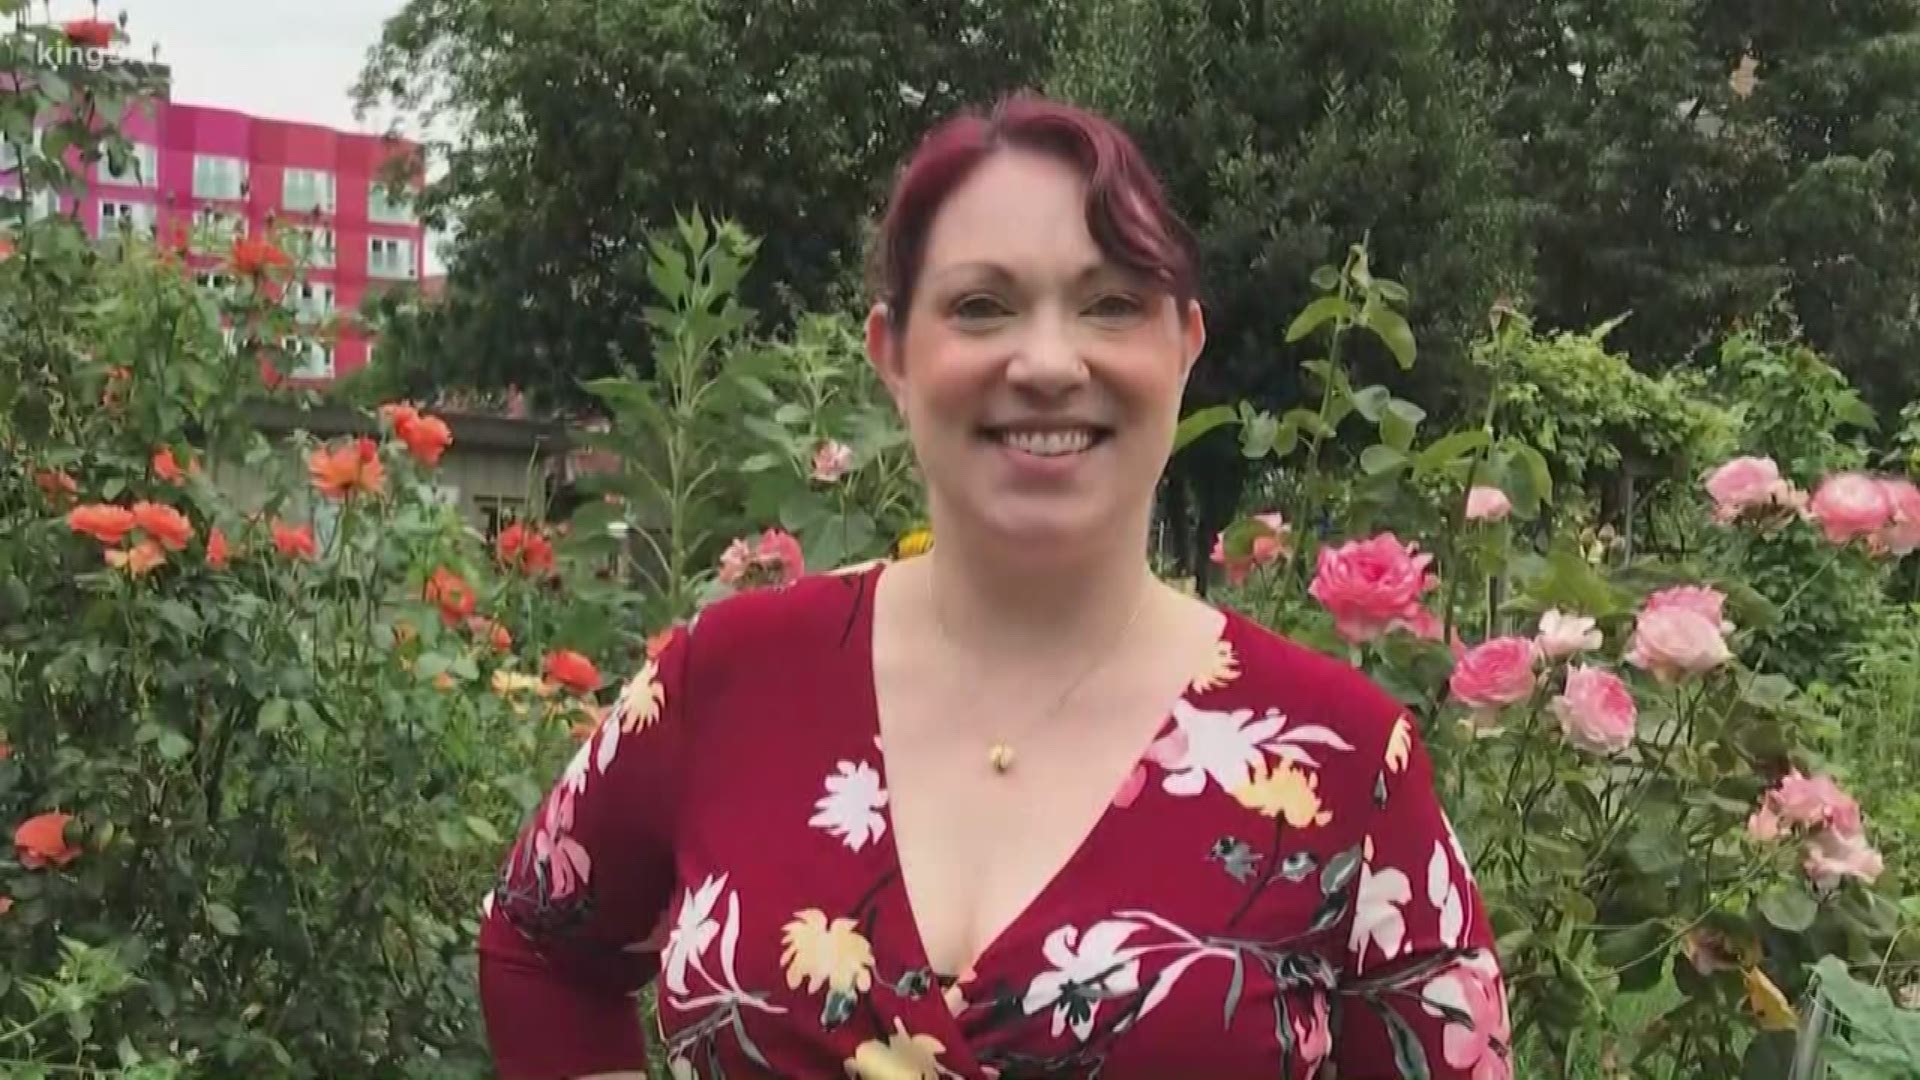 Elizabeth Schneider, a Seattle resident who recently recovered from a coronavirus infection, is helping United Way of King County raise money to help other families.